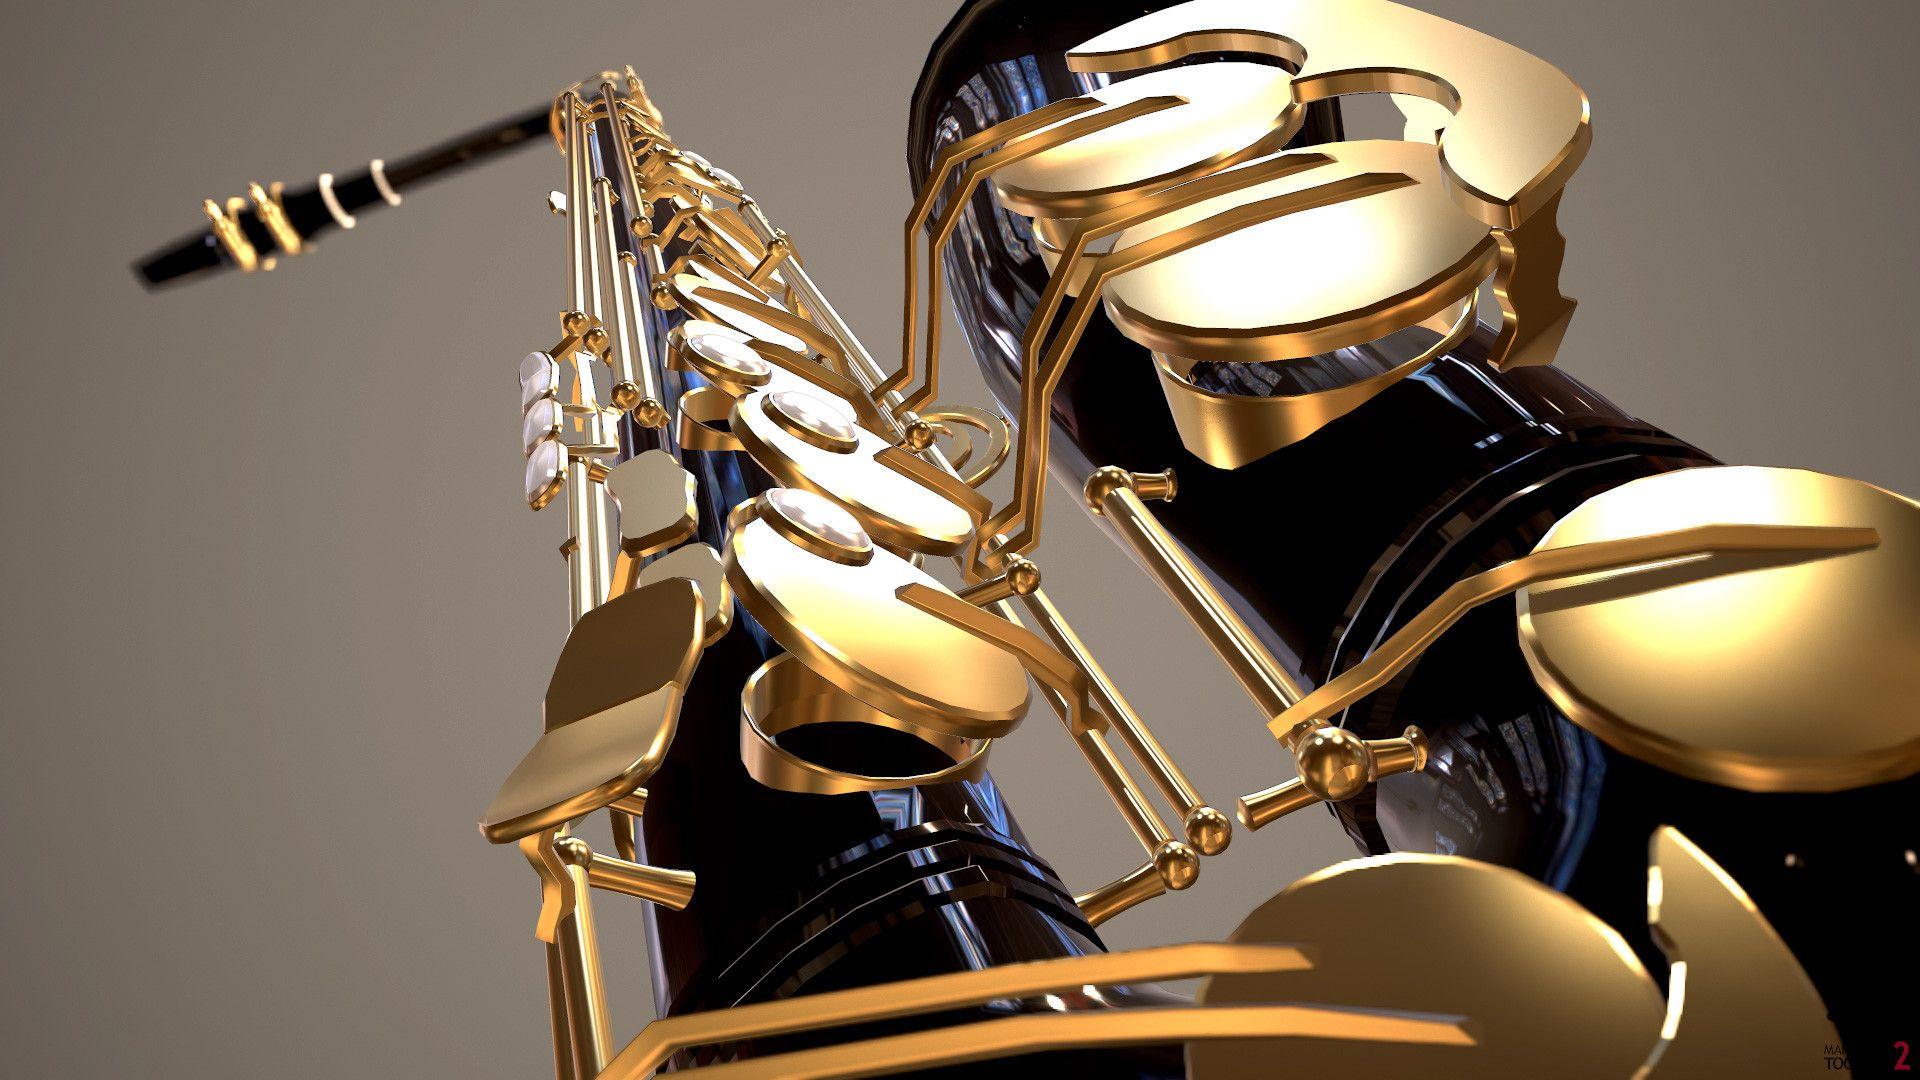 Saxophone Wallpaper background picture